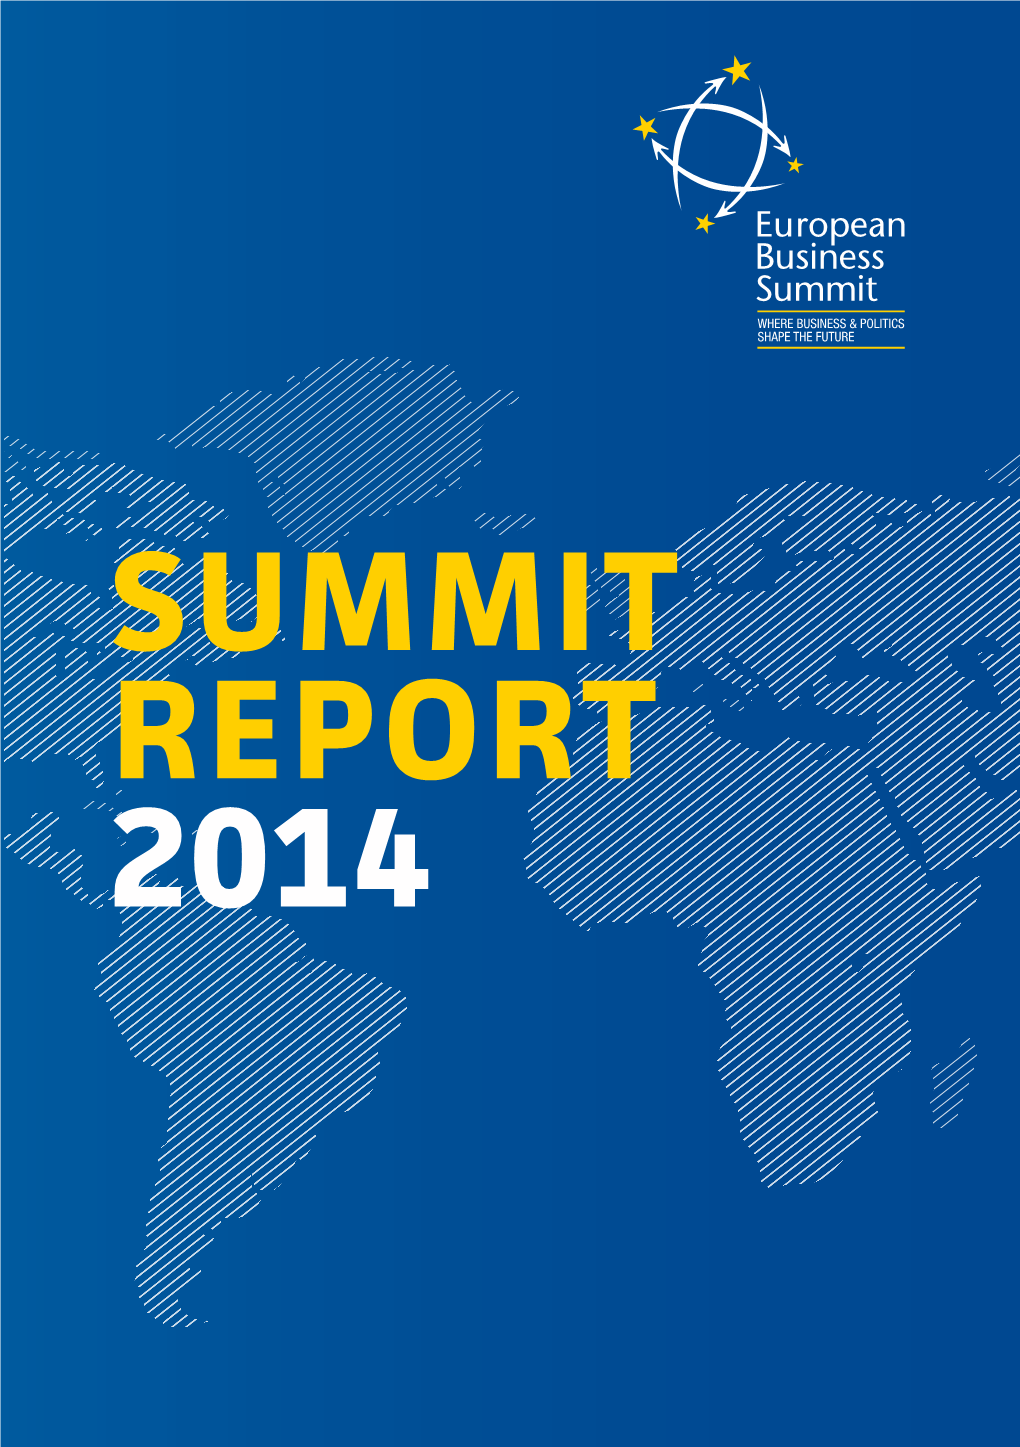 SUMMIT REPORT 2014 How EBS Is Shaping the Future of Europe